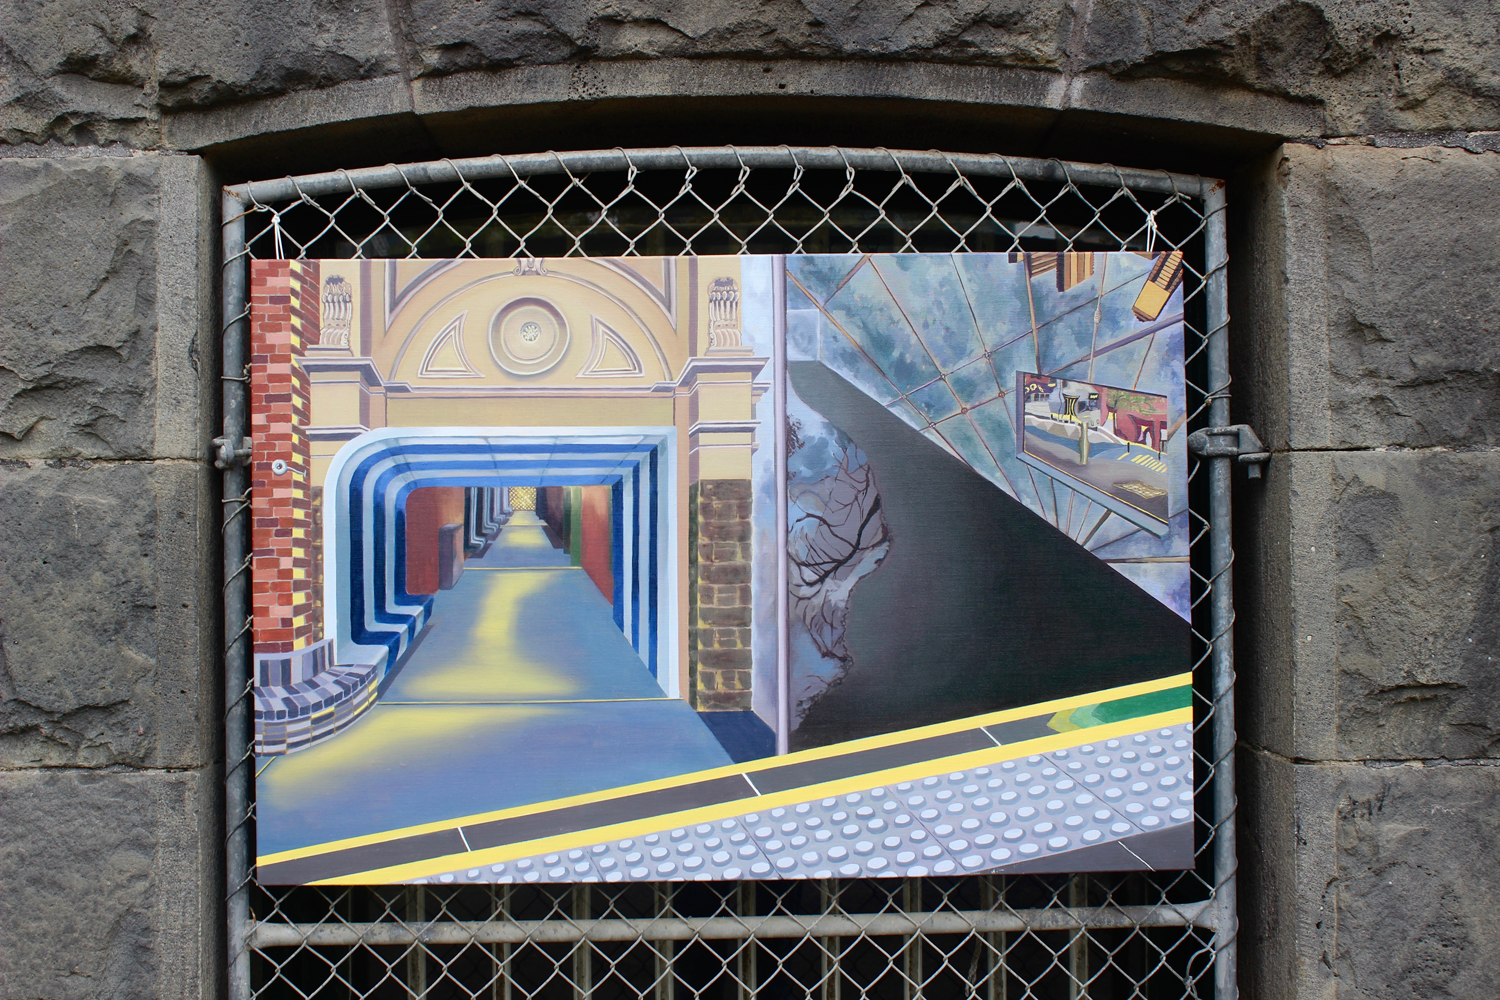 Close-up of painting tied to metal gate at base of the Royal Exhibition Building depicting features of the Royal Exhibition Building, a tram platform and blue striped seating from RMIT university. 